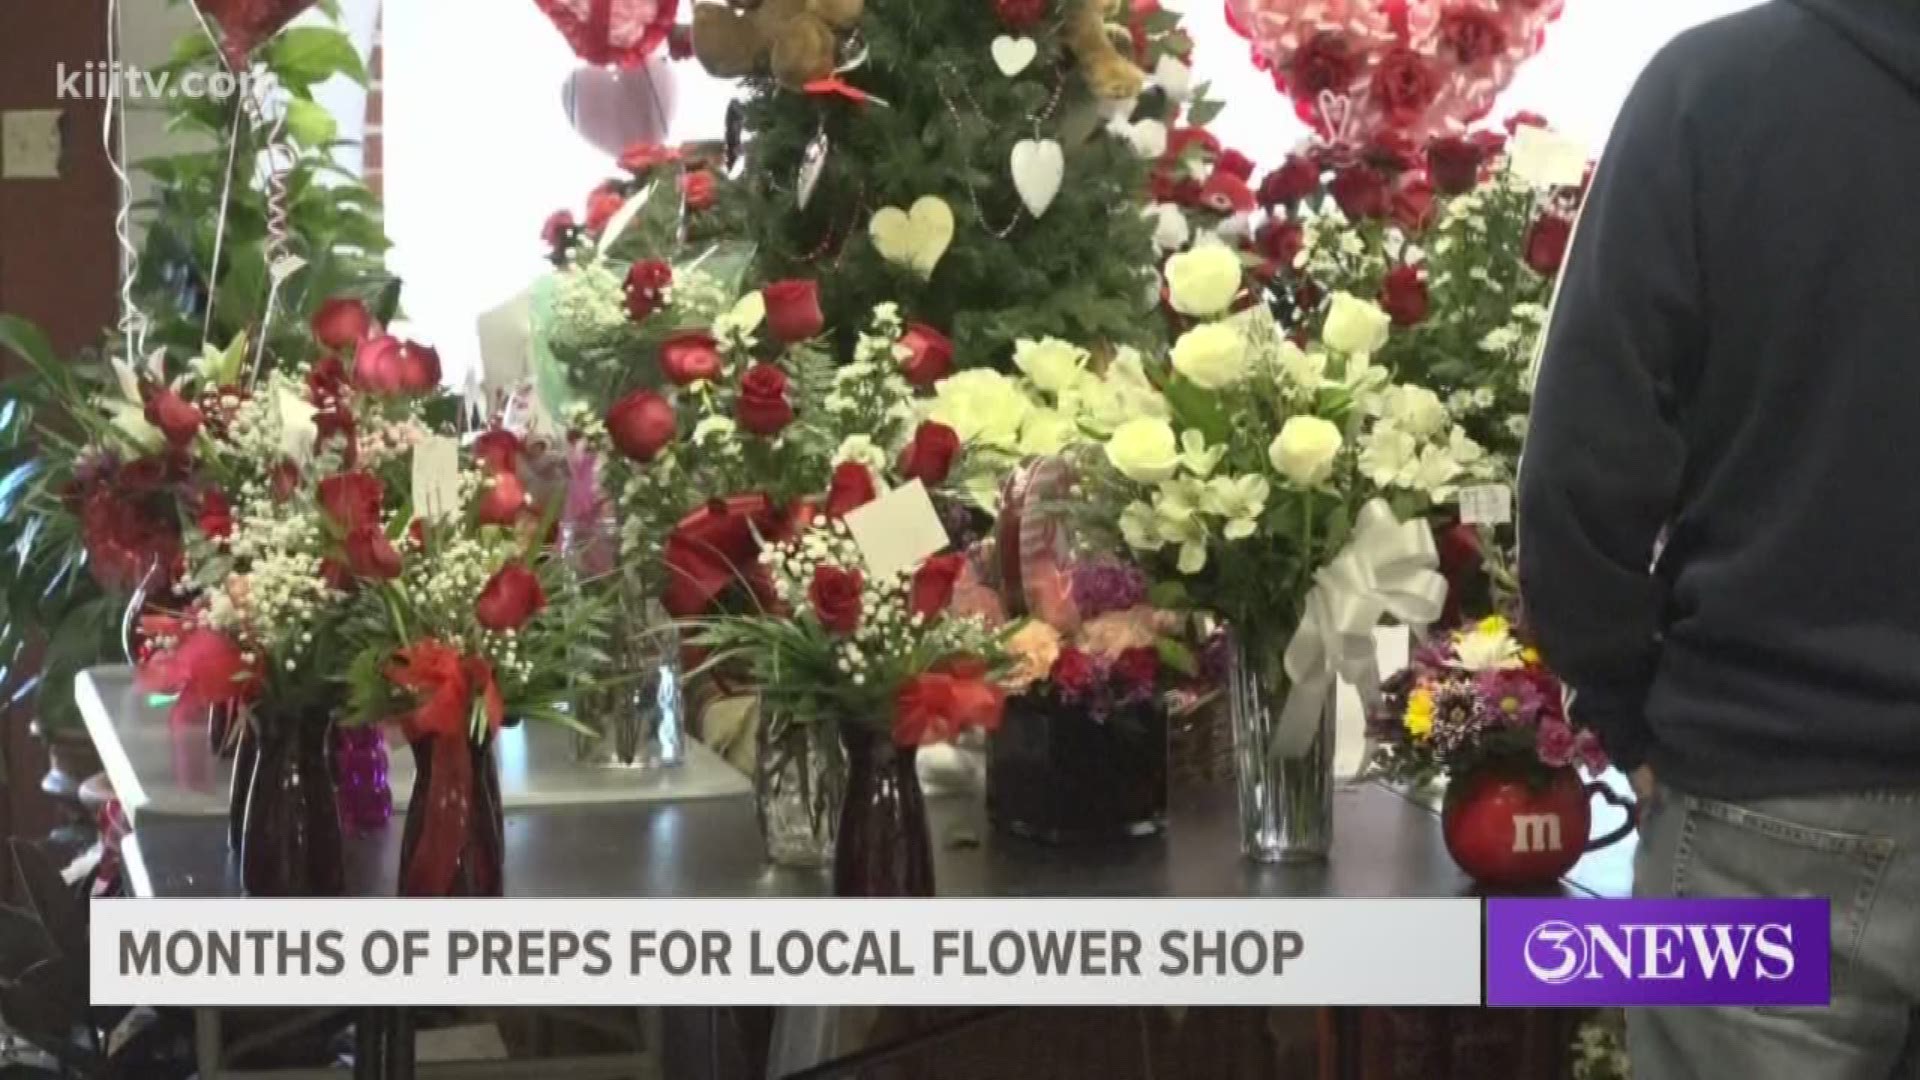 Valentine's Day is the busiest day of the year for flower shops.